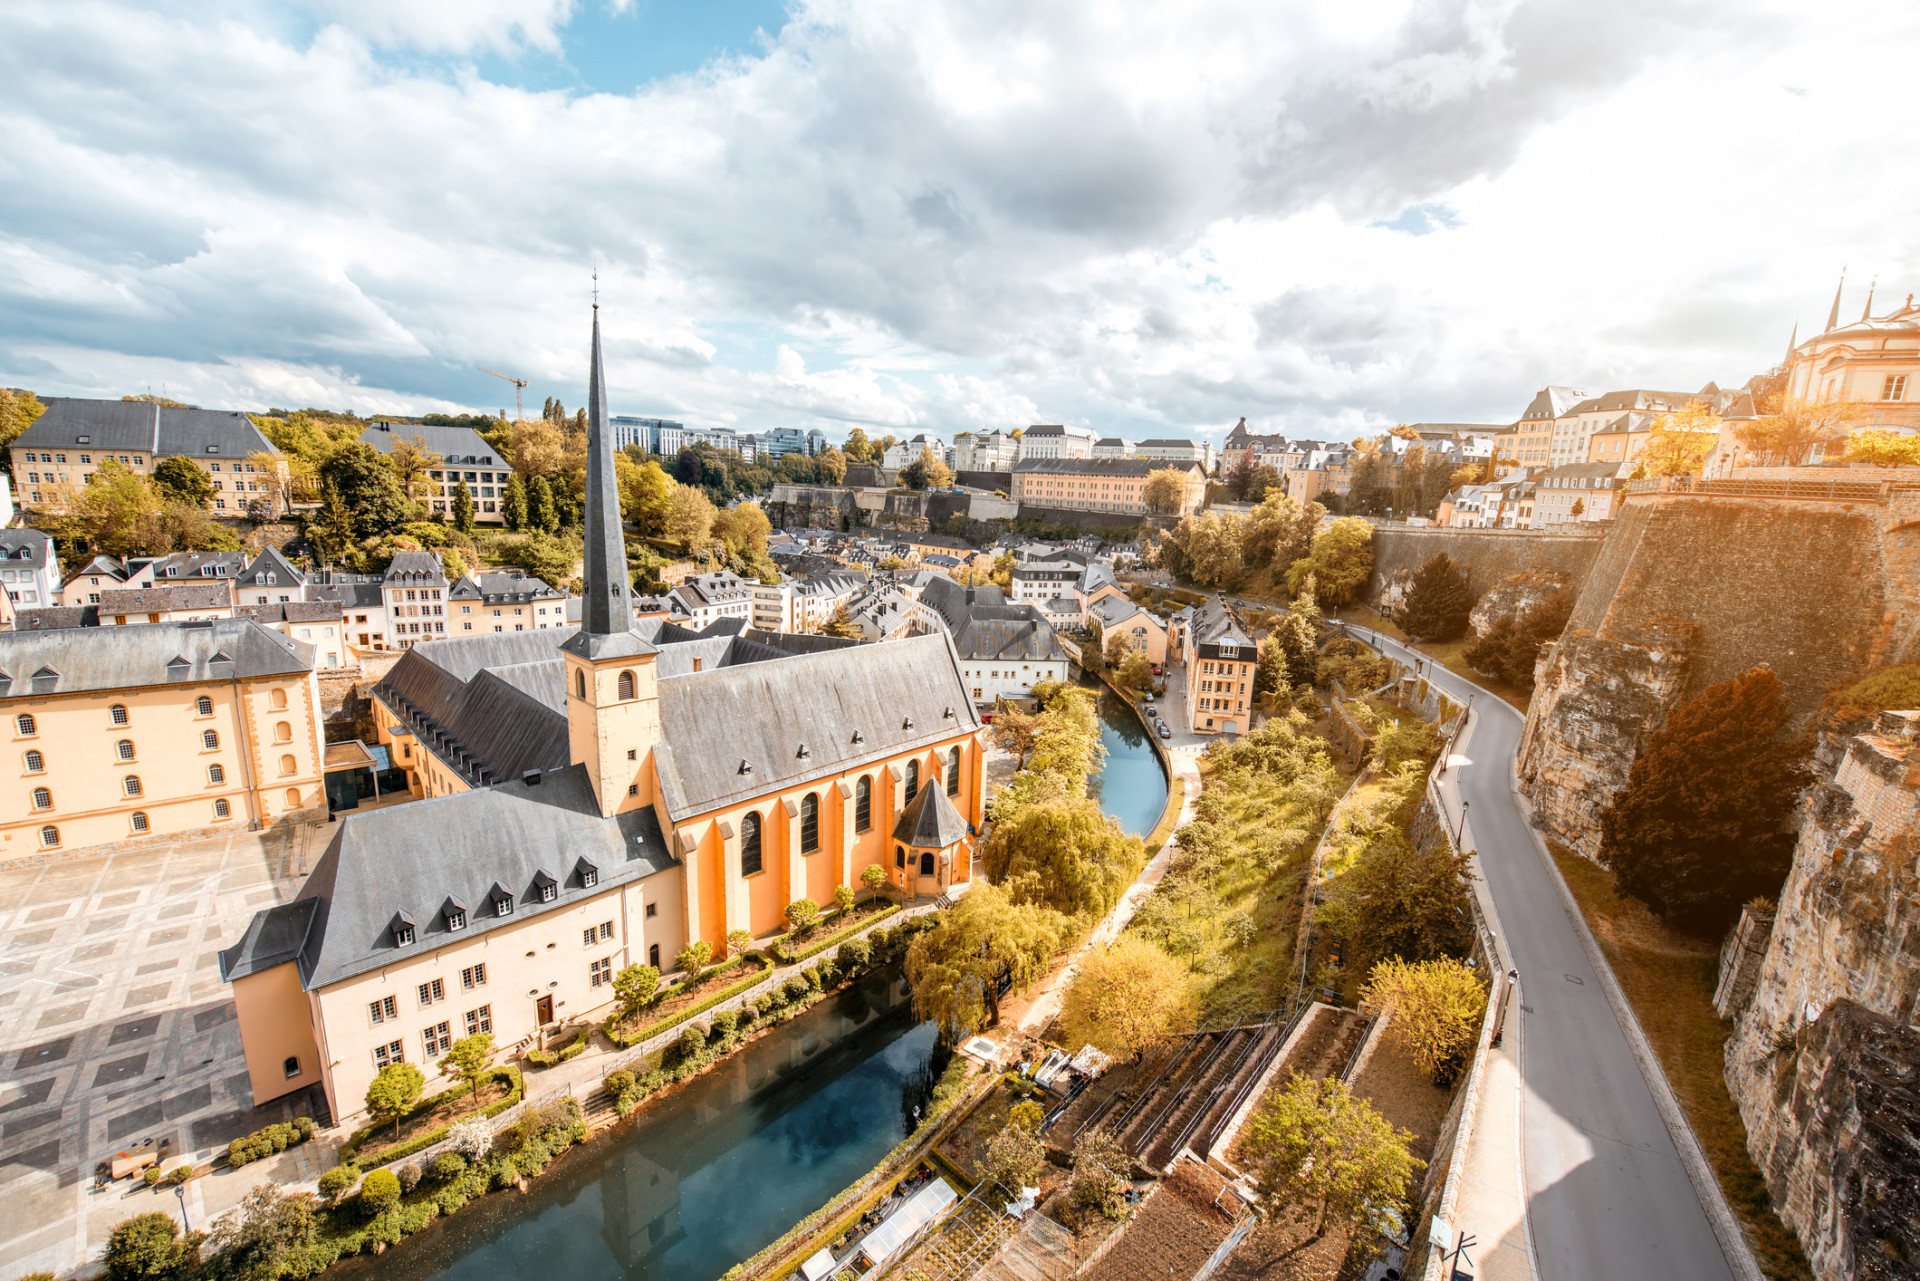 This small city in the small nation of Luxembourg has surprisingly got a lot to offer.<p><a href="https://www.msn.com/en-us/community/channel/vid-7xx8mnucu55yw63we9va2gwr7uihbxwc68fxqp25x6tg4ftibpra?cvid=94631541bc0f4f89bfd59158d696ad7e">Follow us and access great exclusive content every day</a></p>